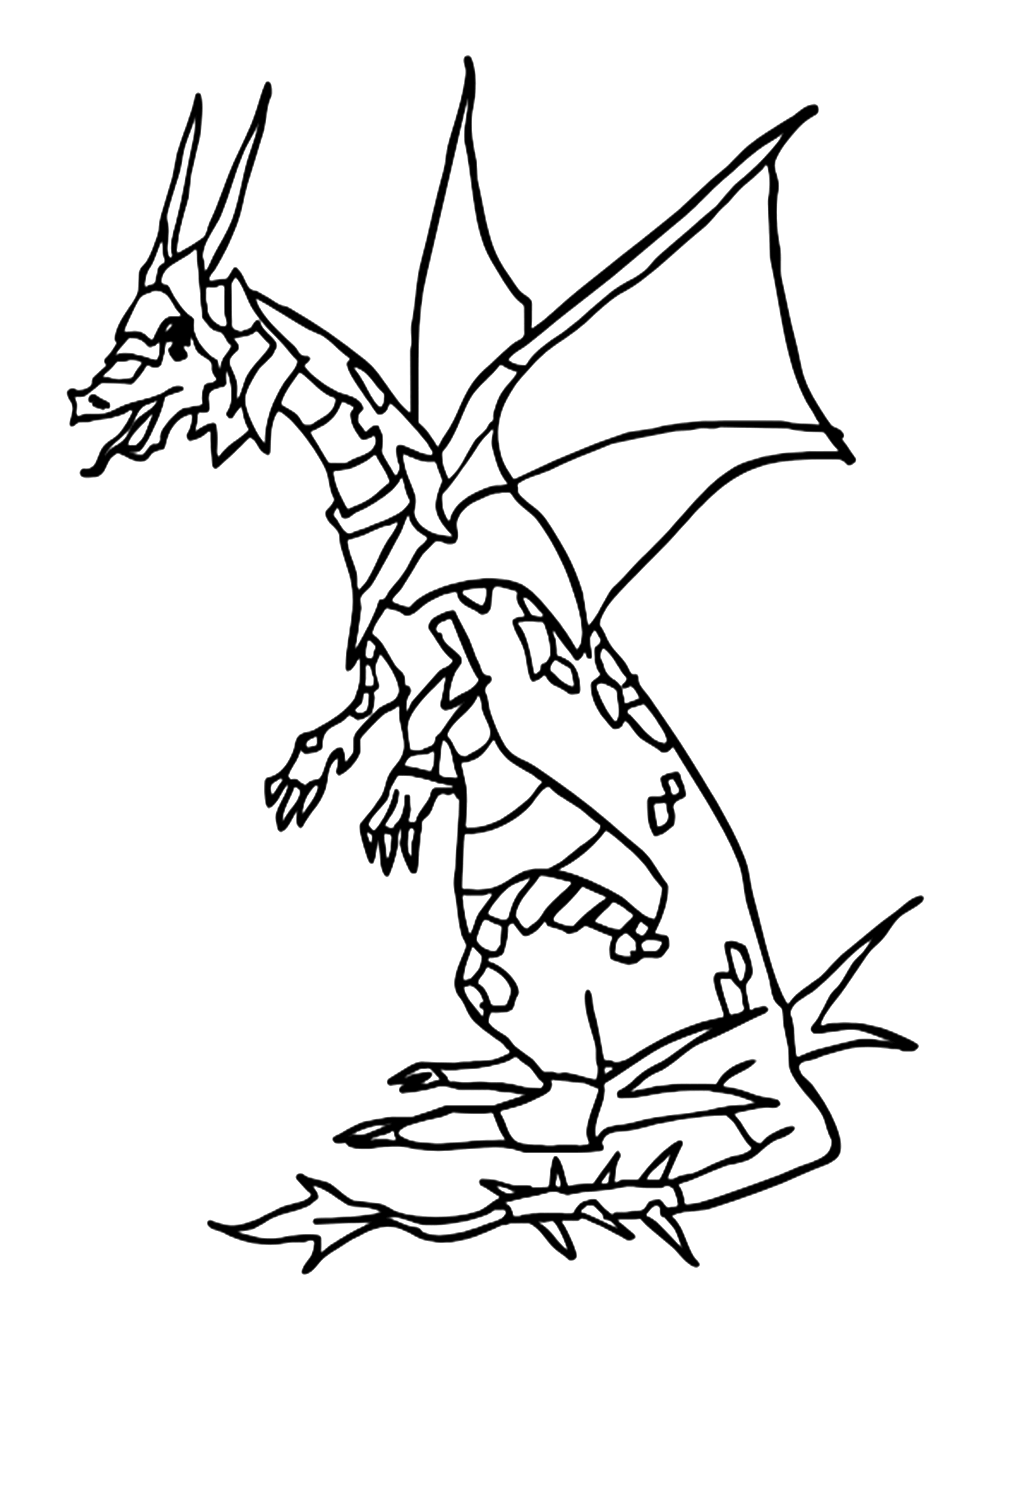 Dragon Warrior Coloring Pages